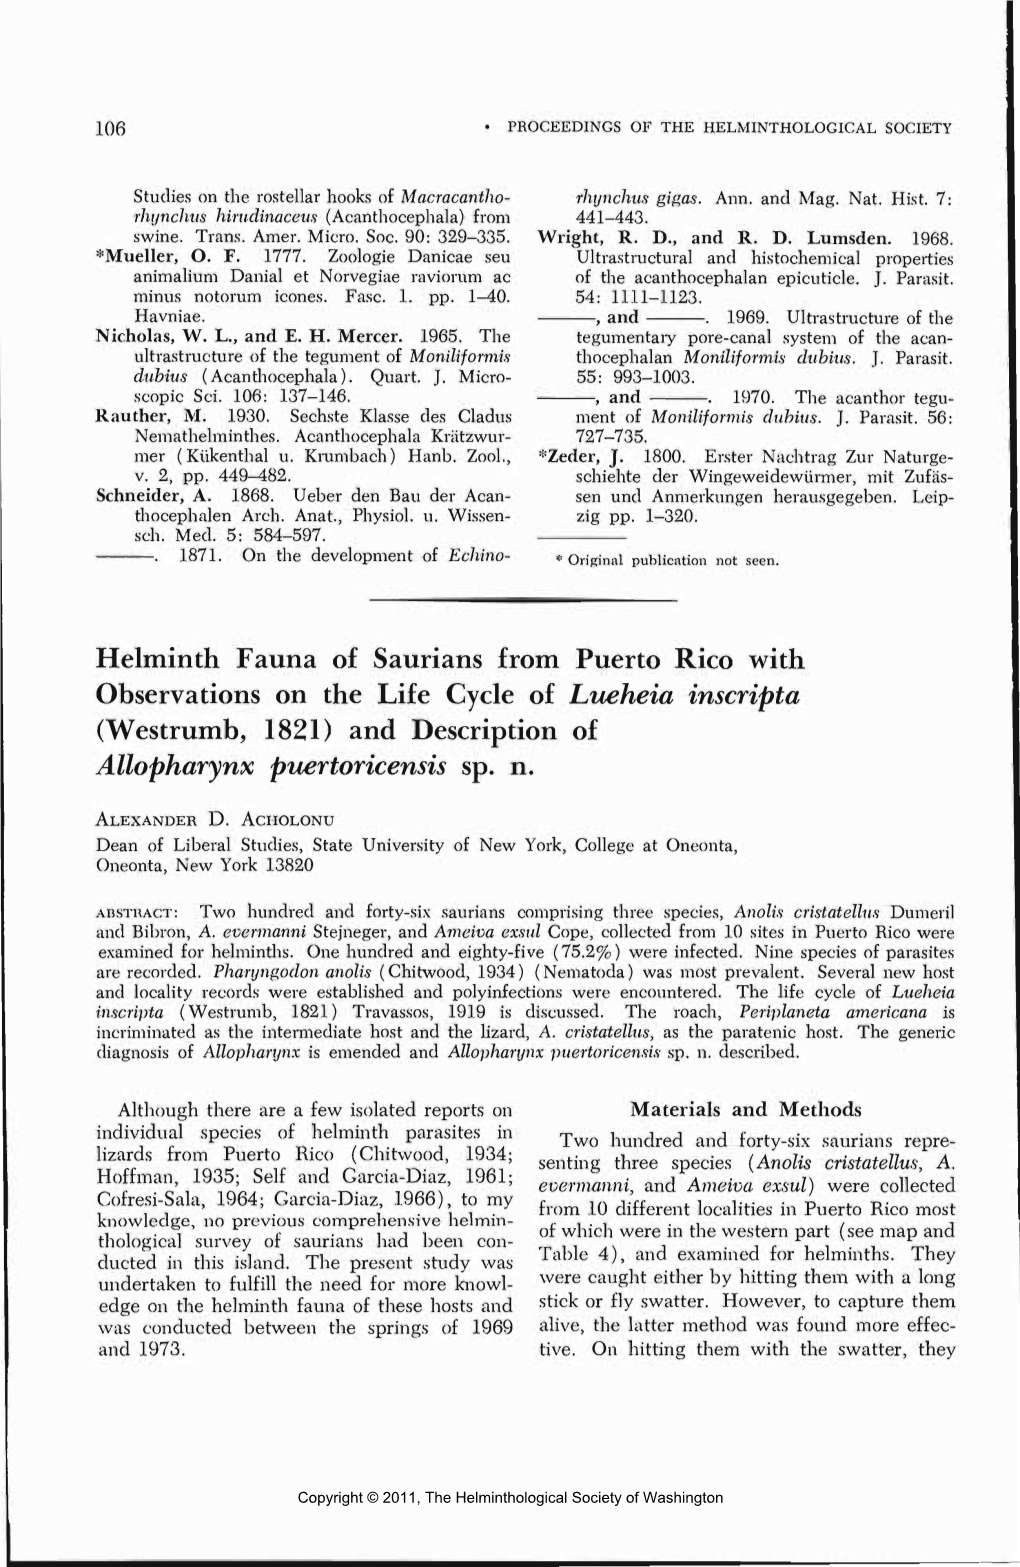 Helminth Fauna of Saurians from Puerto Rico with Observations on the Life Cycle of Lueheia Inscripta (Westrumb, 1821) and Description of Allopharynx Puertoricensis Sp